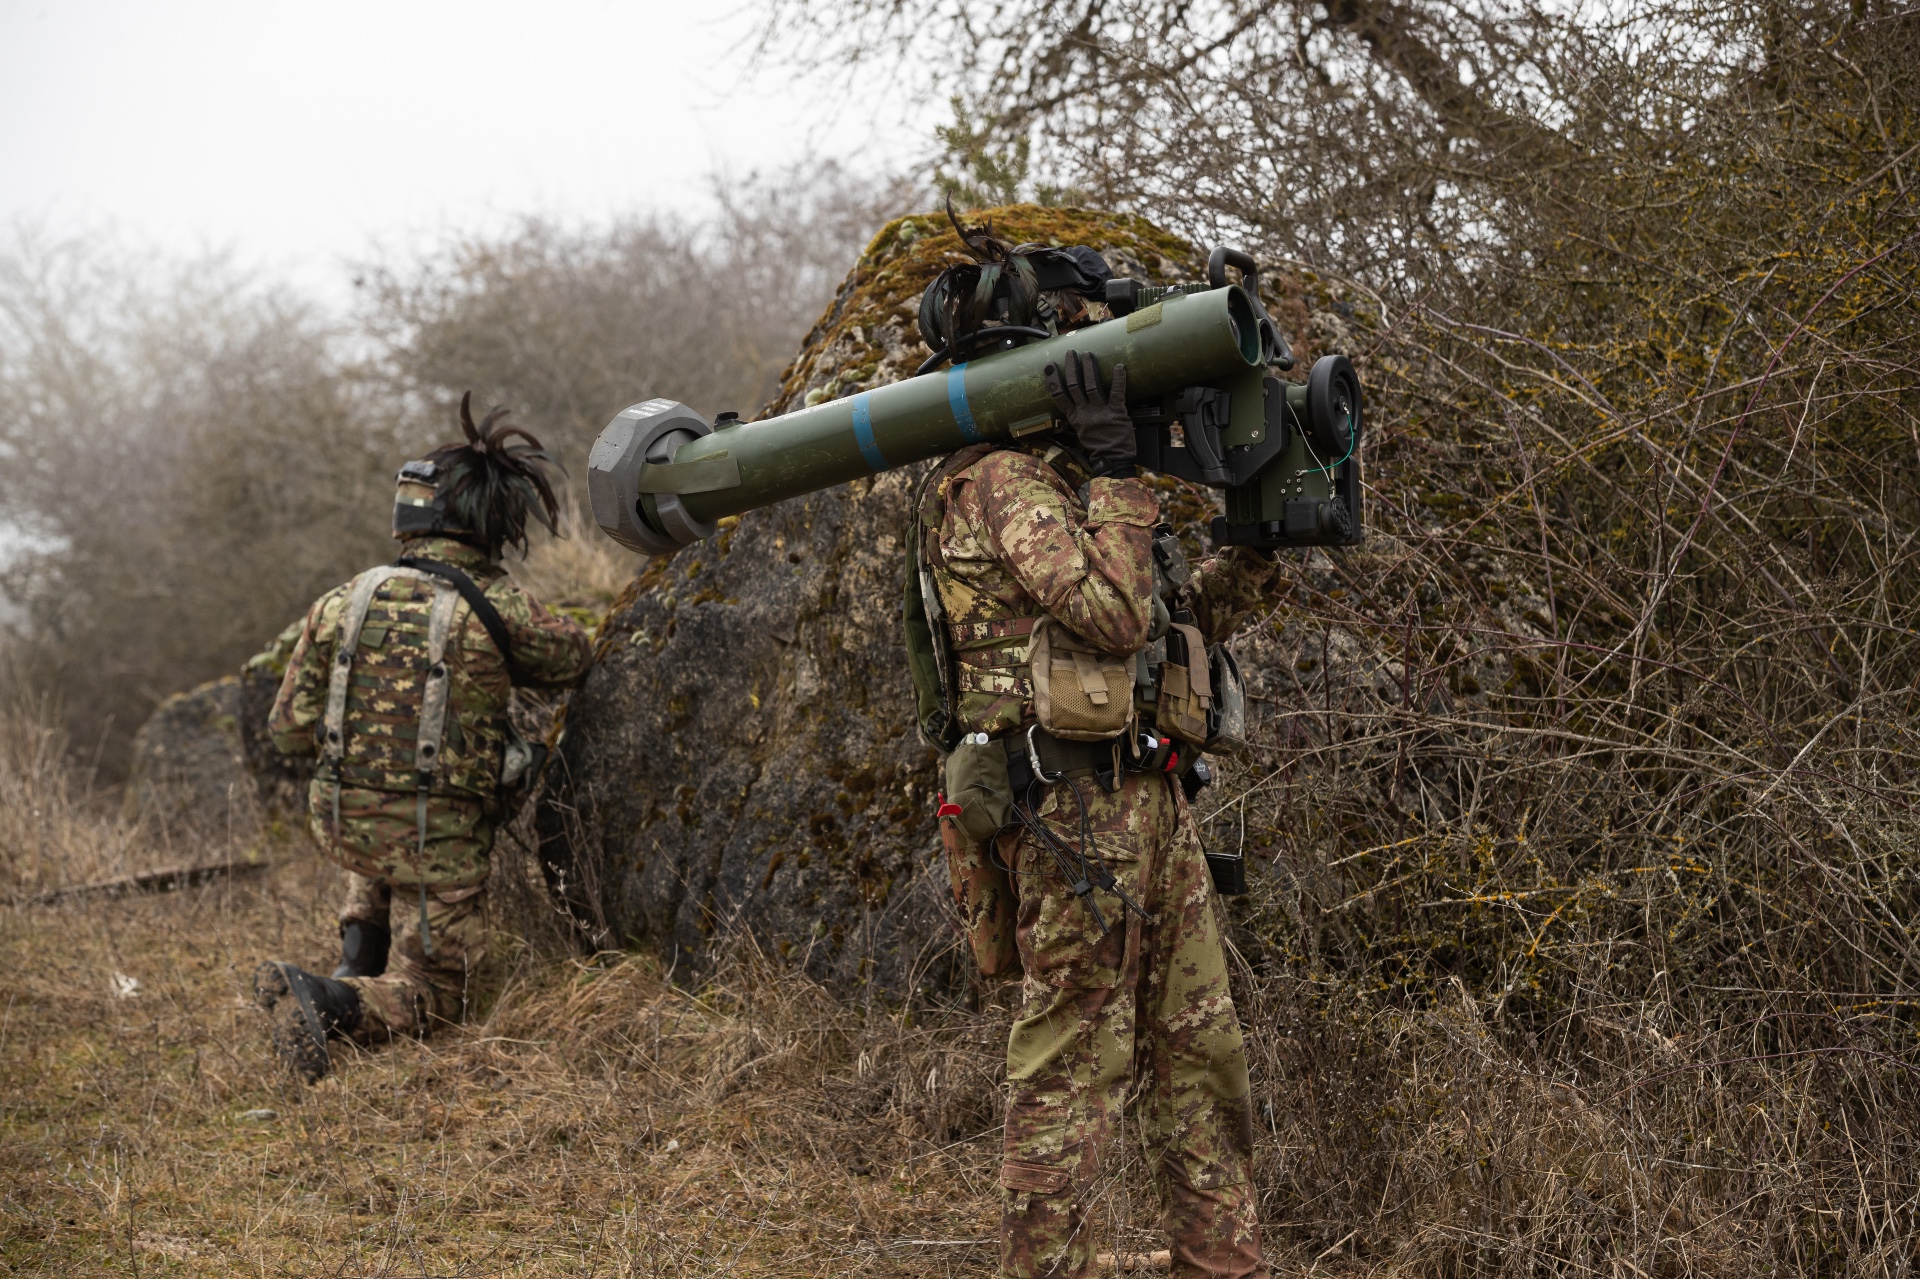 An Italian soldier assigned to Bravo Company, 11th Bersaglieri Battalion aims the Spike-LR anti-tank guided missile